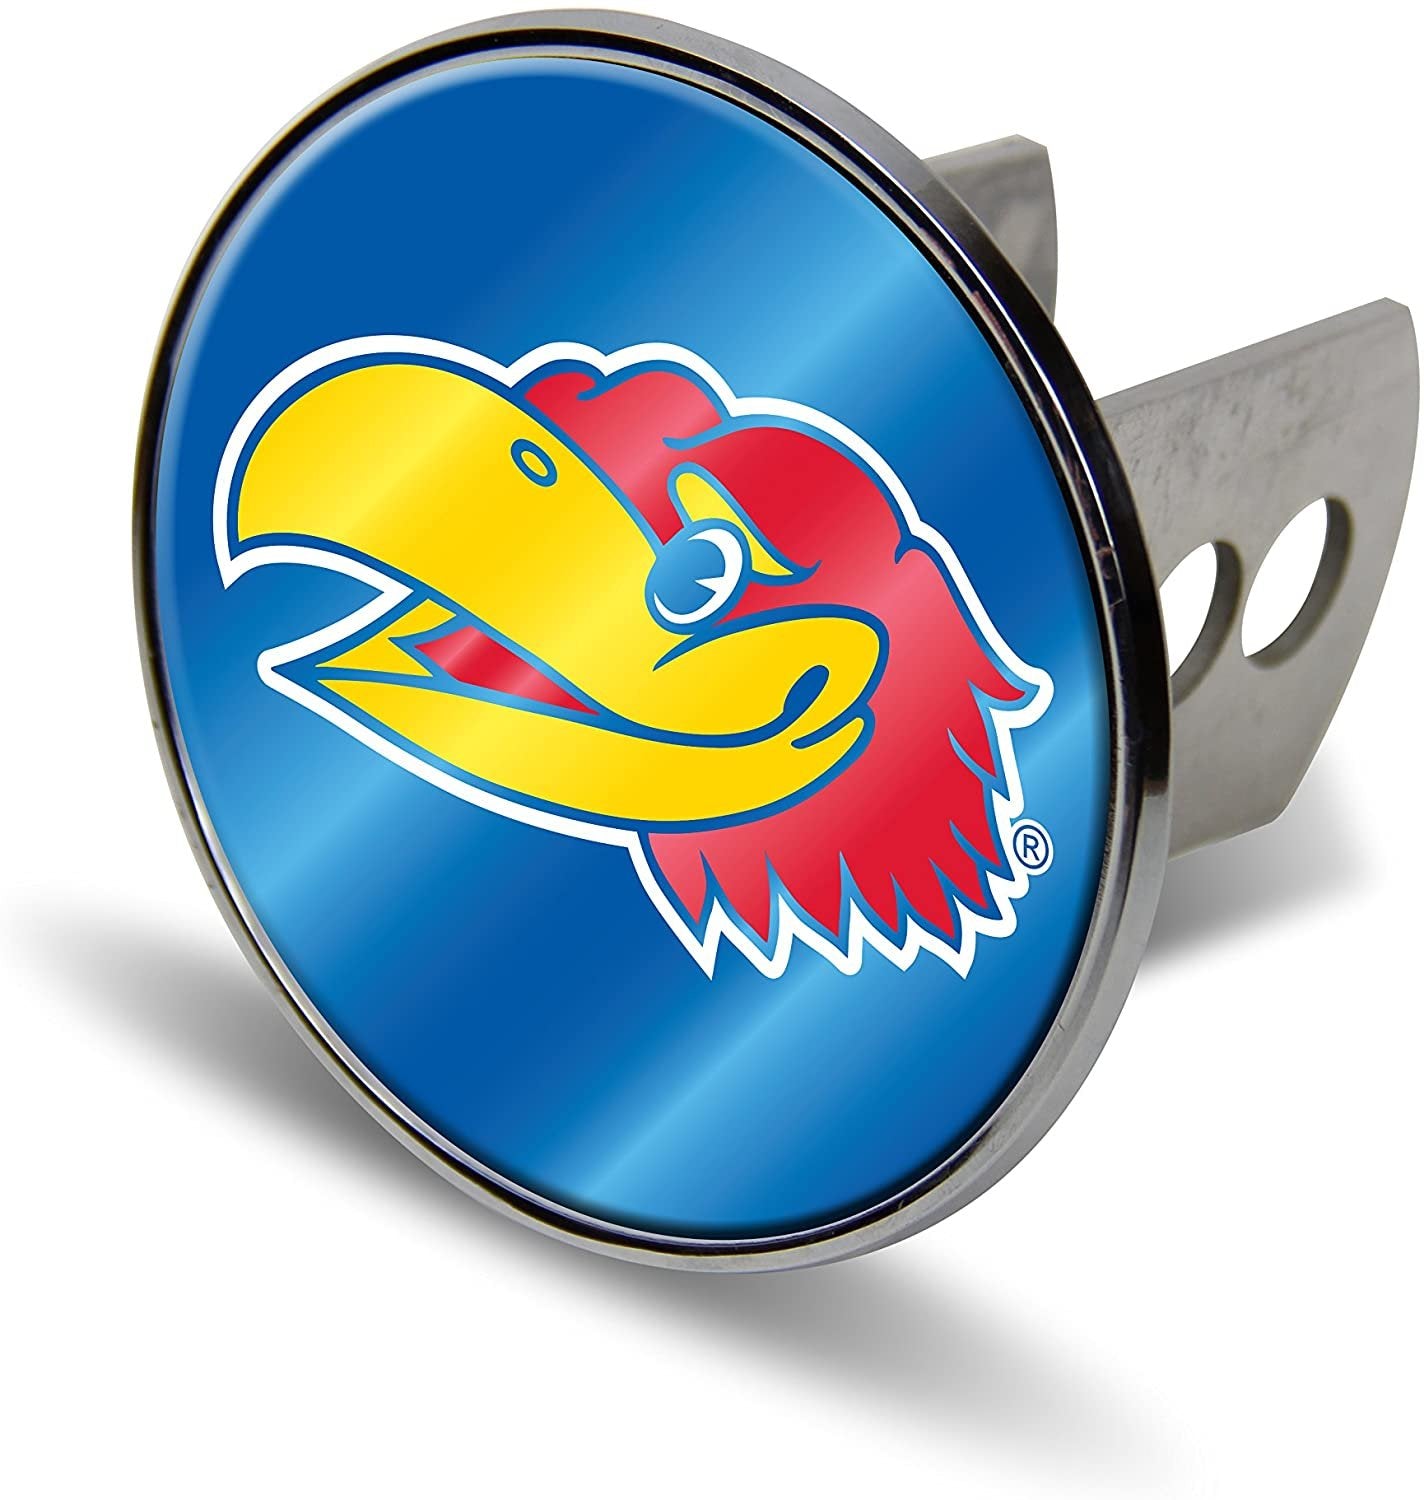 Kansas Jayhawks Metal Hitch Cover with Laser Cut Mirrored Acrylic Insert for 2 Inch Receiver University of